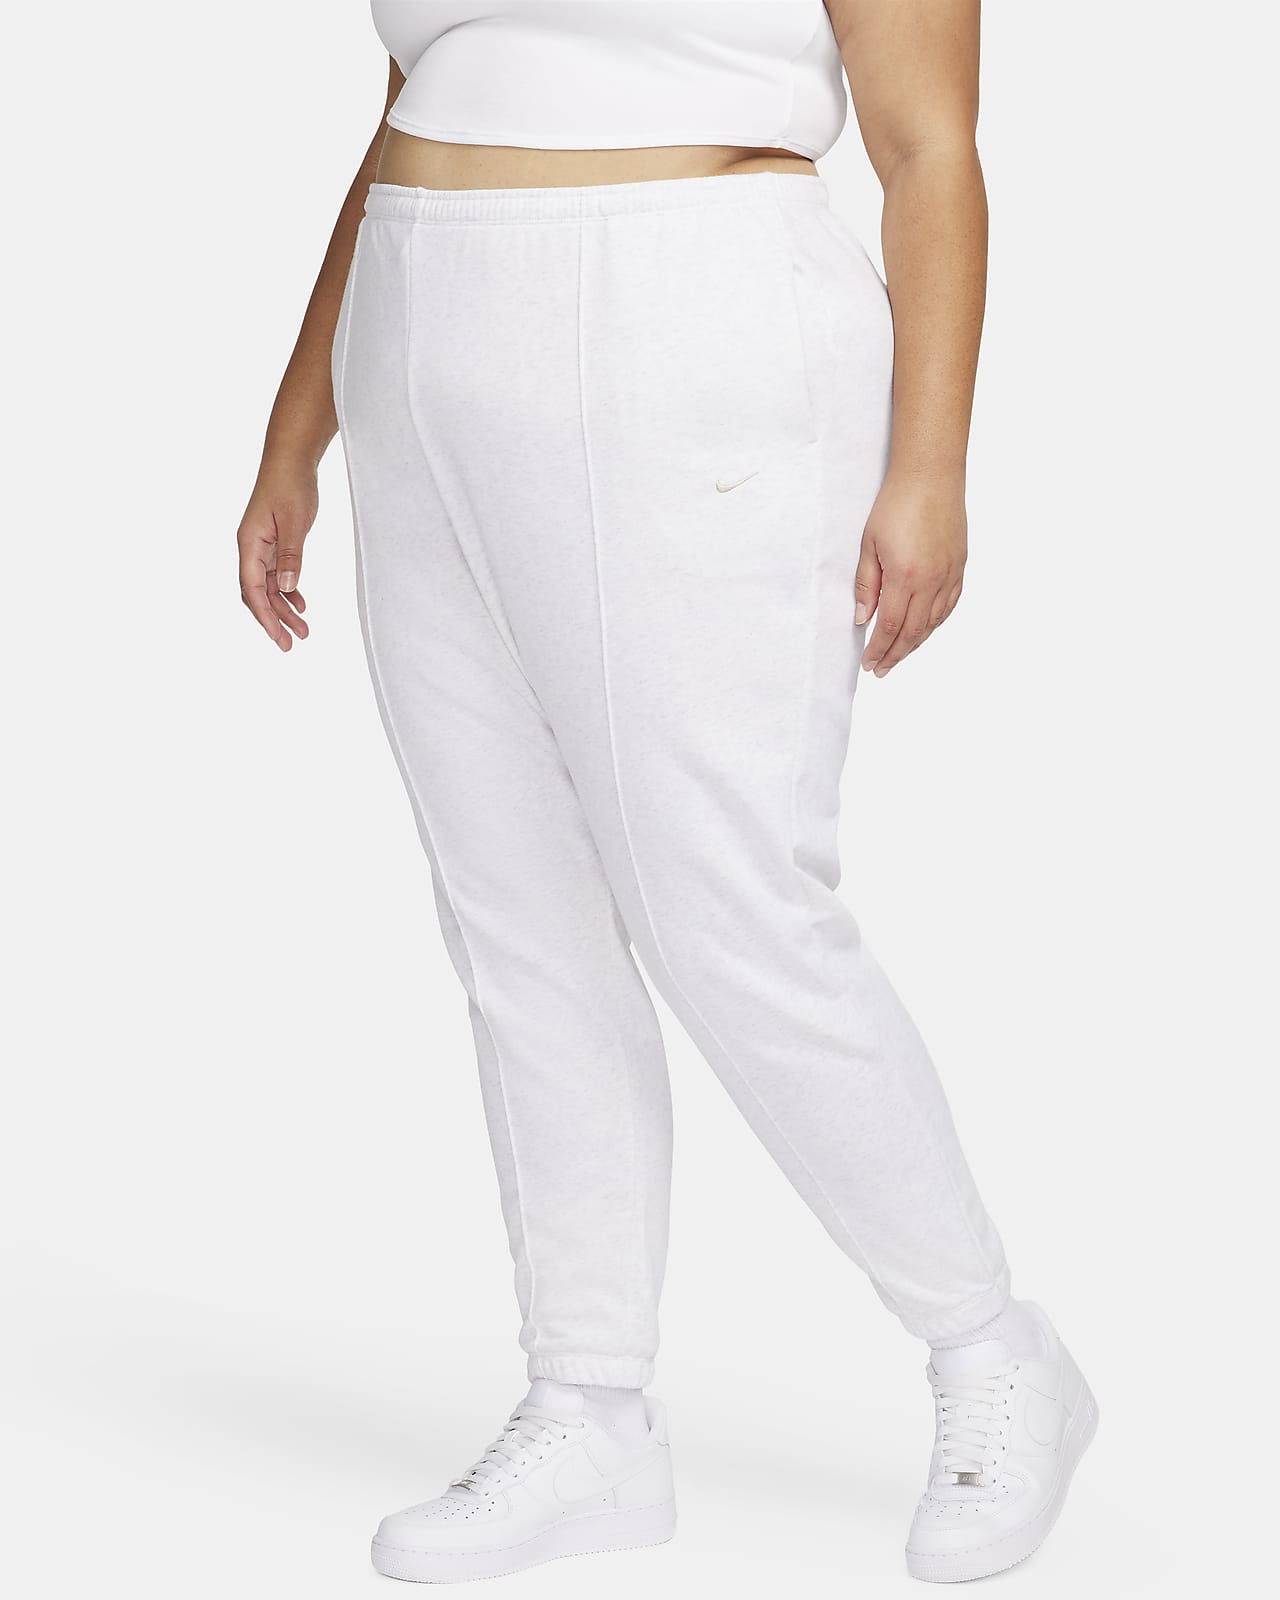 Nike Sportswear Chill Terry Women's Slim High-Waisted French Terry Sweatpants (Plus Size)